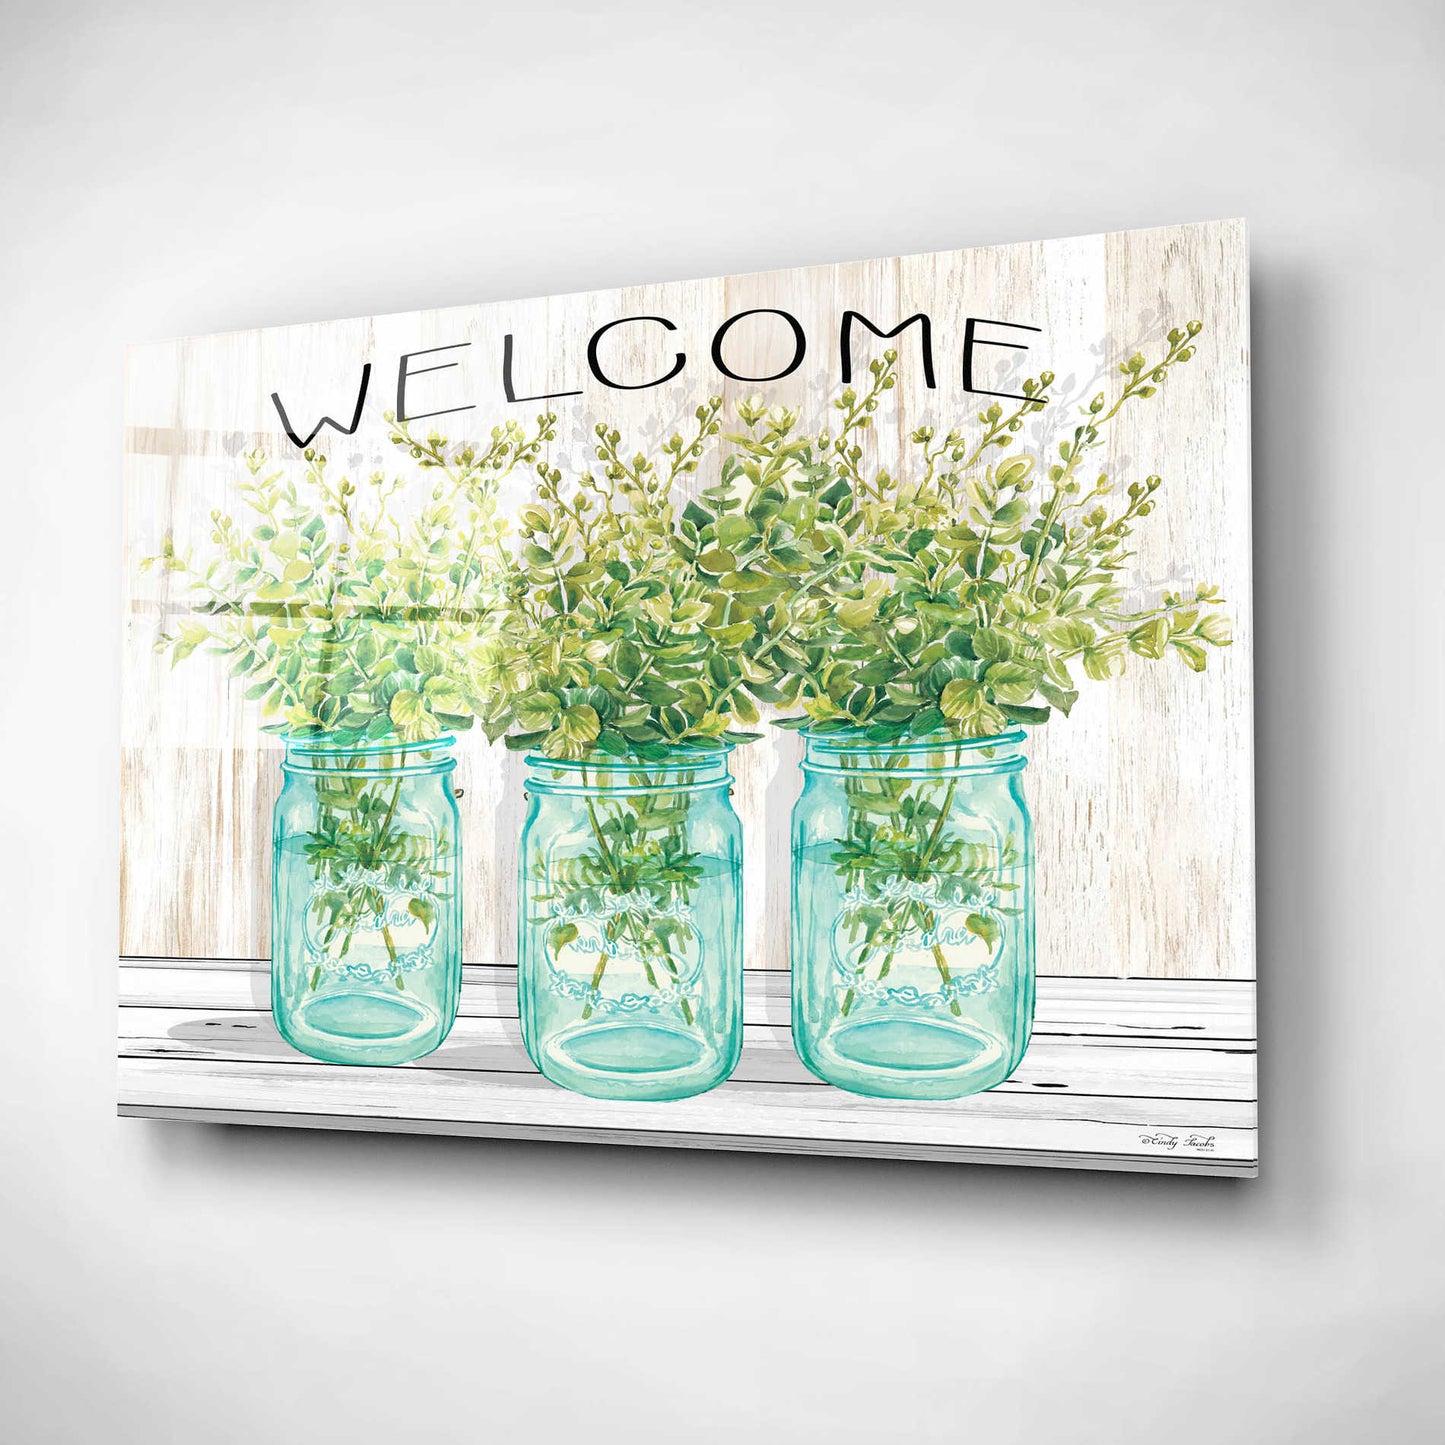 Epic Art 'Welcome Glass Jars' by Cindy Jacobs, Acrylic Glass Wall Art,24x16